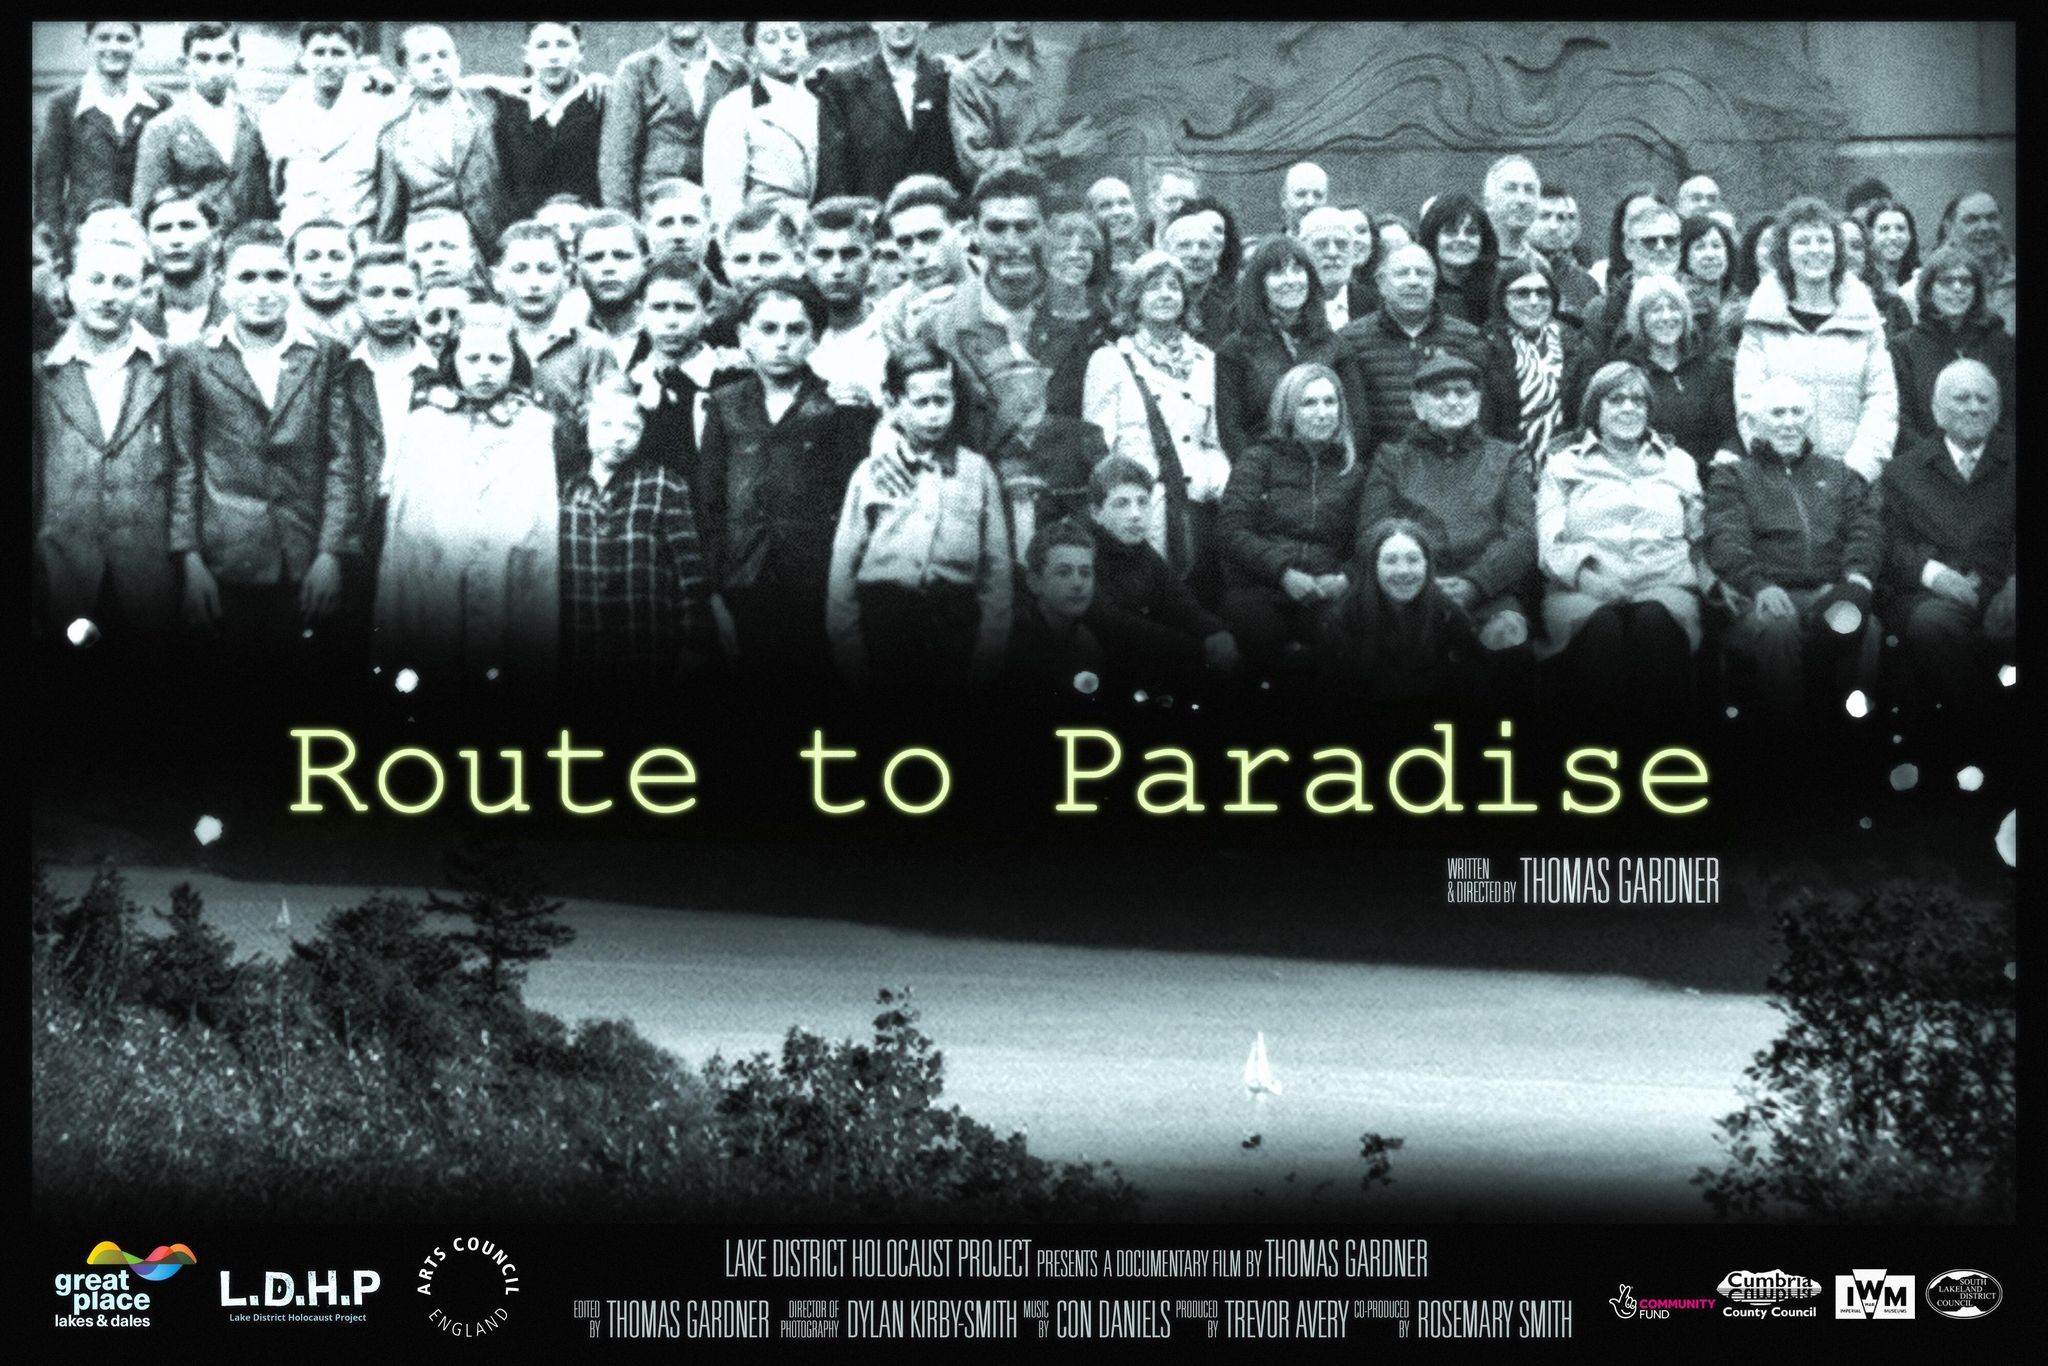 Route to Paradise